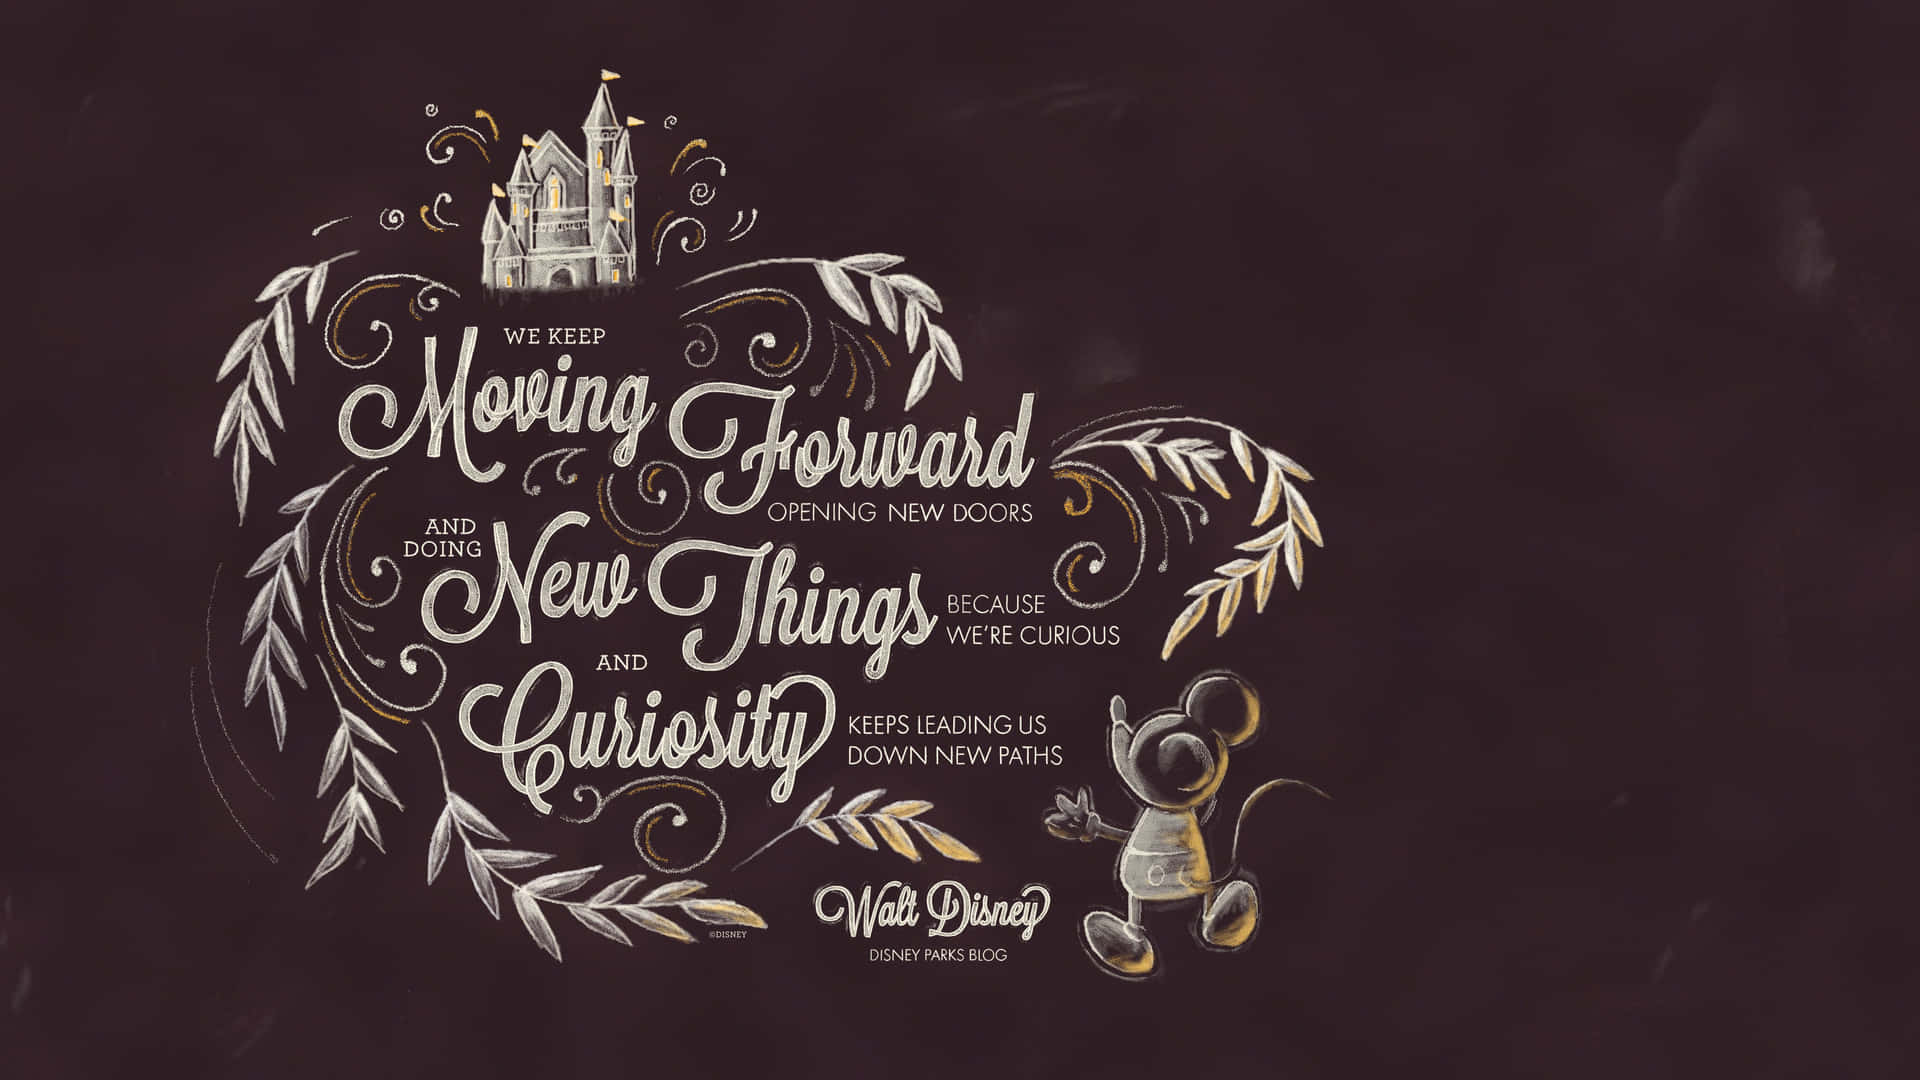 Disney Computer Quote About Moving Forward Wallpaper